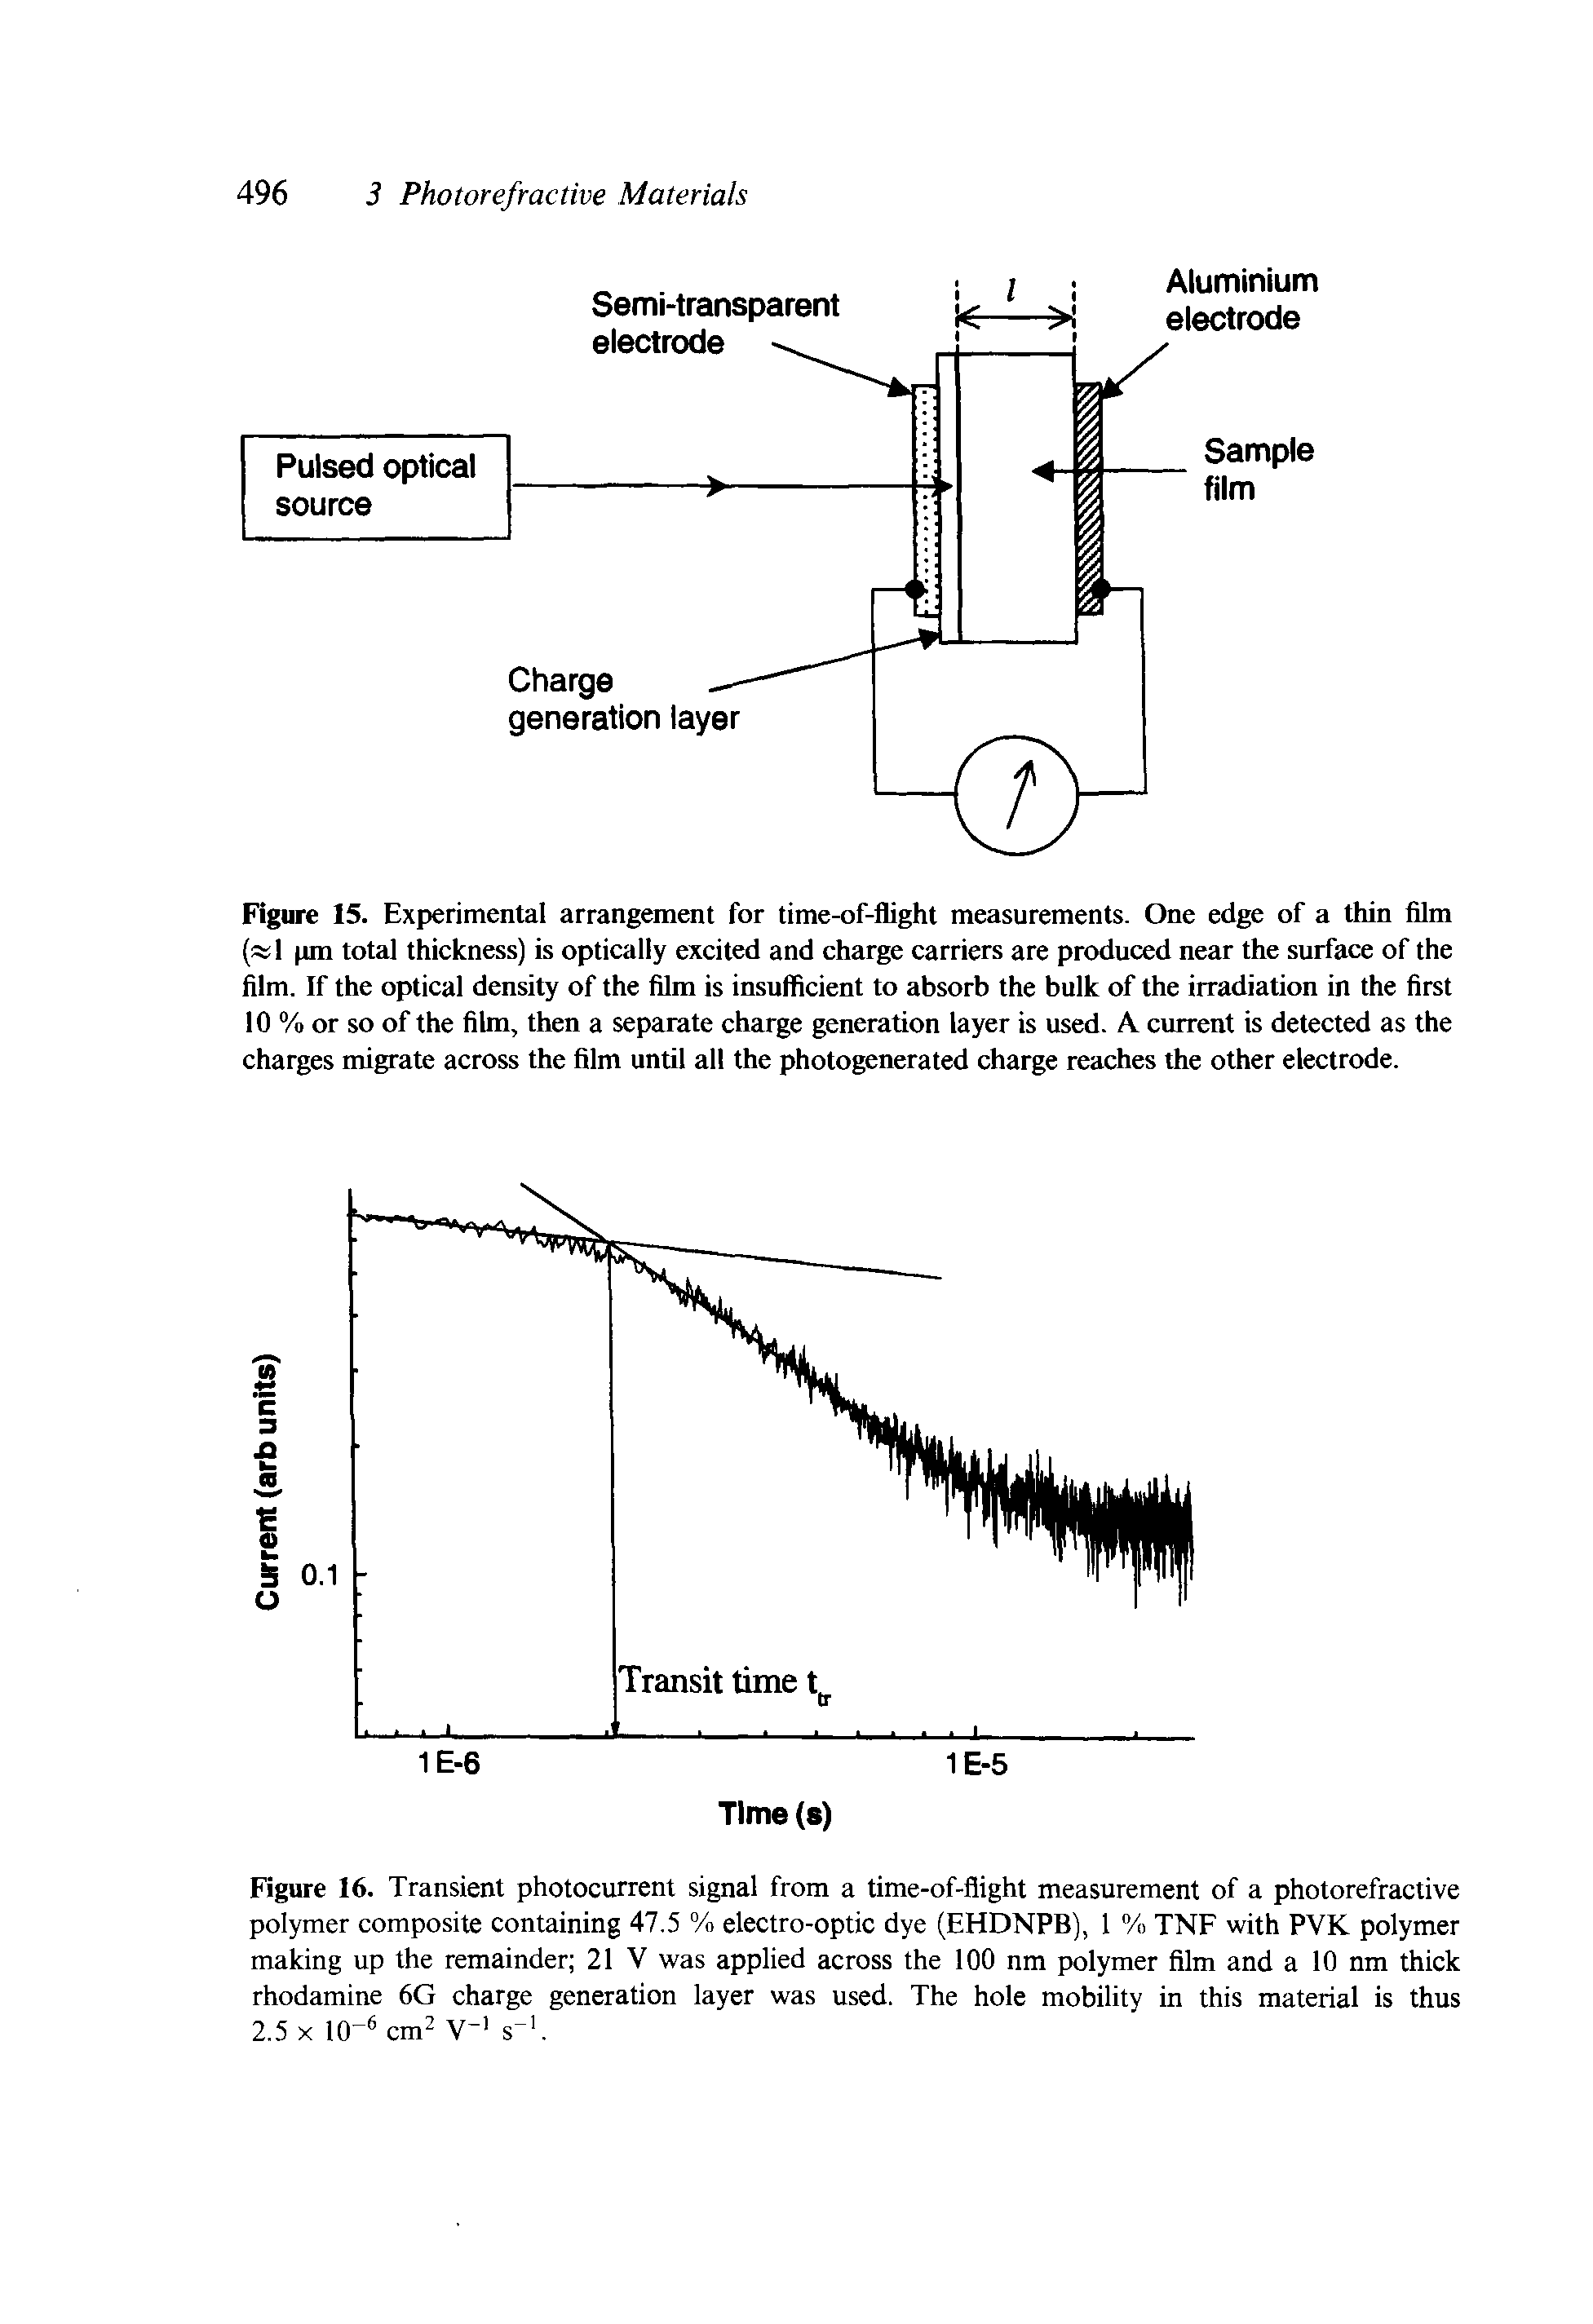 Figure 15. Experimental arrangement for time-of-flight measurements. One edge of a thin film ( 1 pm total thickness) is optically excited and charge carriers are produced near the surface of the film. If the optical density of the film is insufficient to absorb the bulk of the irradiation in the first 10 % or so of the film, then a separate charge generation layer is used. A current is detected as the charges migrate across the film until all the photogenerated charge reaches the other electrode.